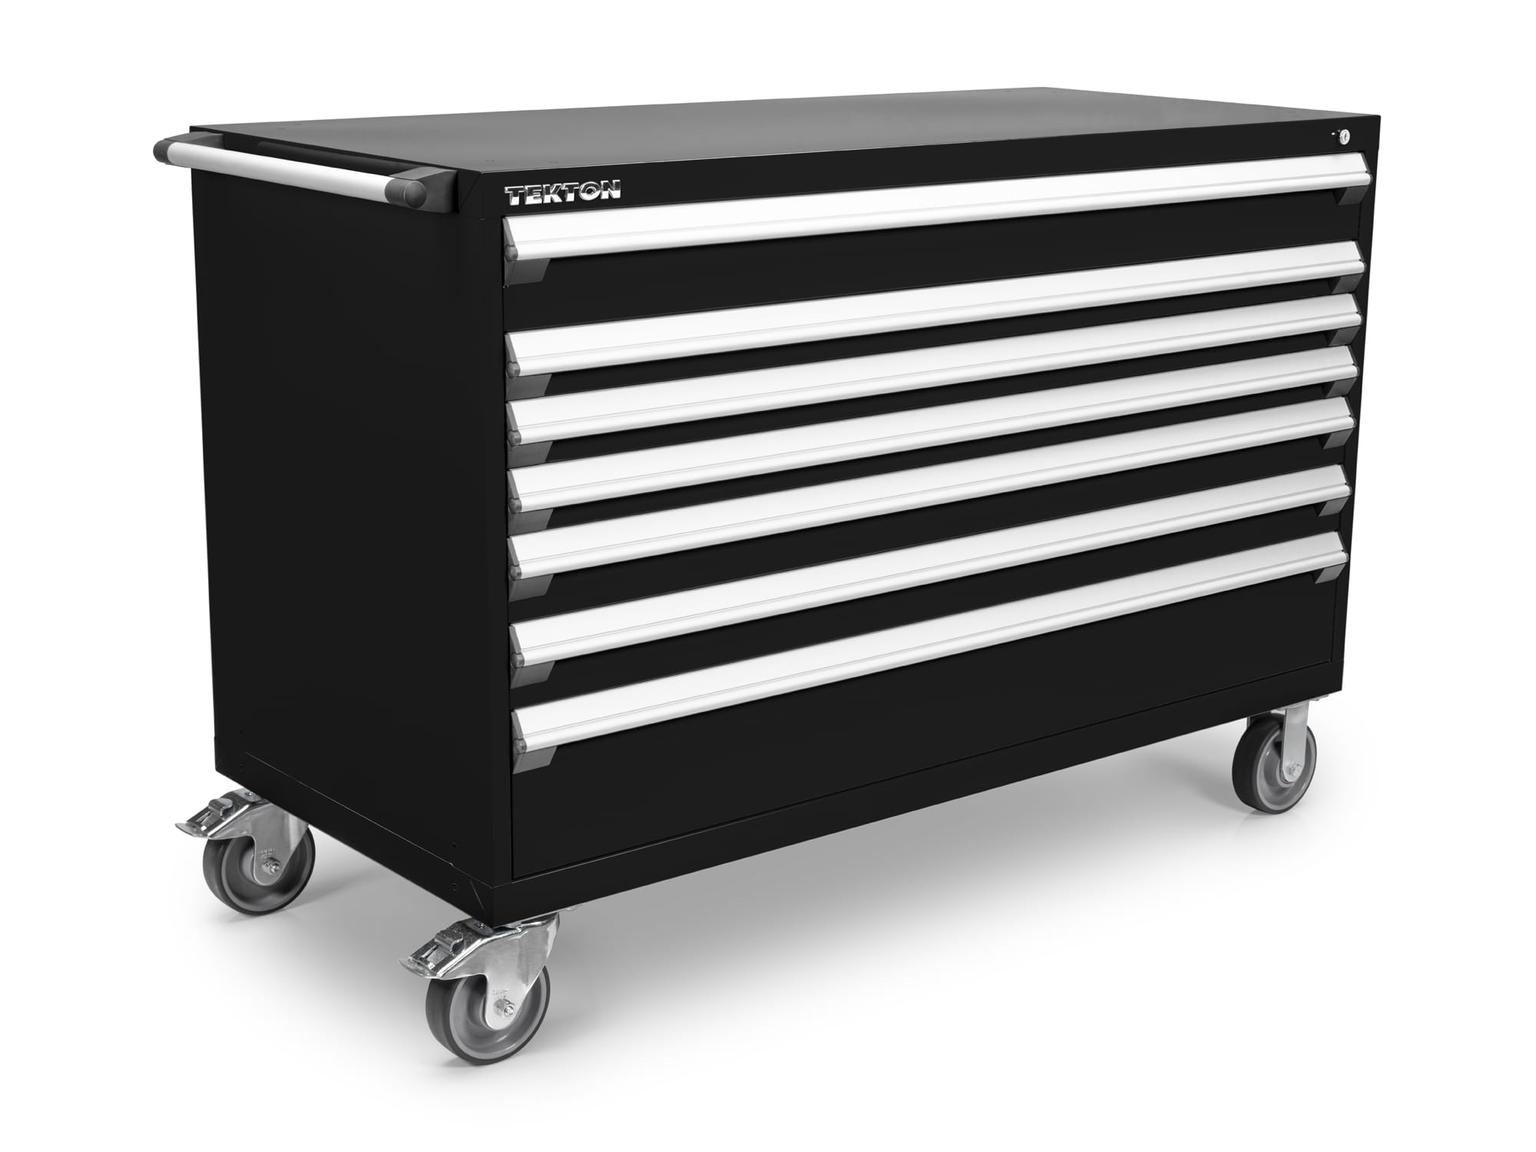 7-Drawer Tool Cabinet, Black (60 W x 27 D x 41.5 H in.)